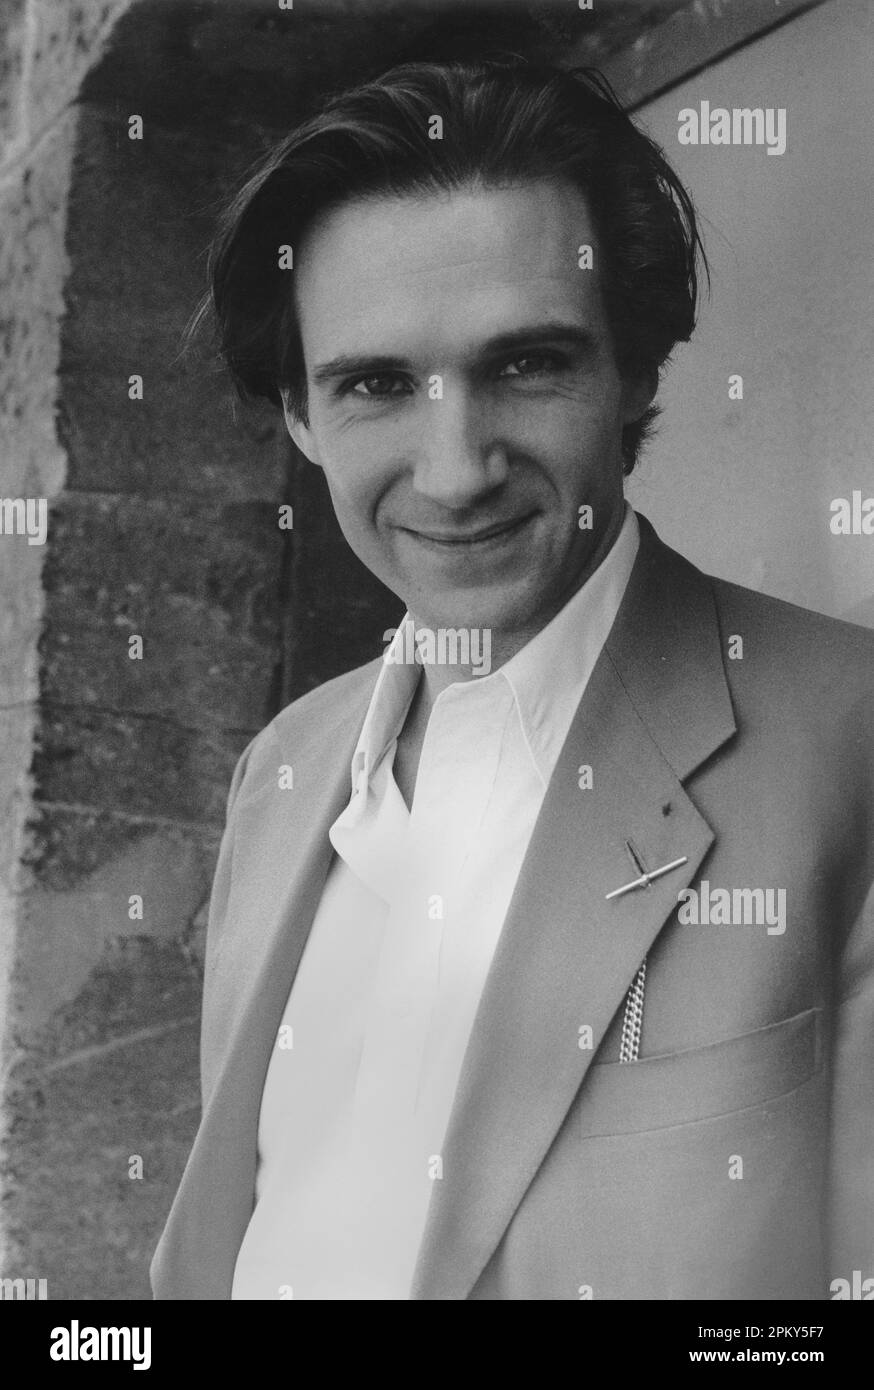 British Actor Ralph Fiennes in Australia to promote the film Oscar and Lucinda. Stock Photo